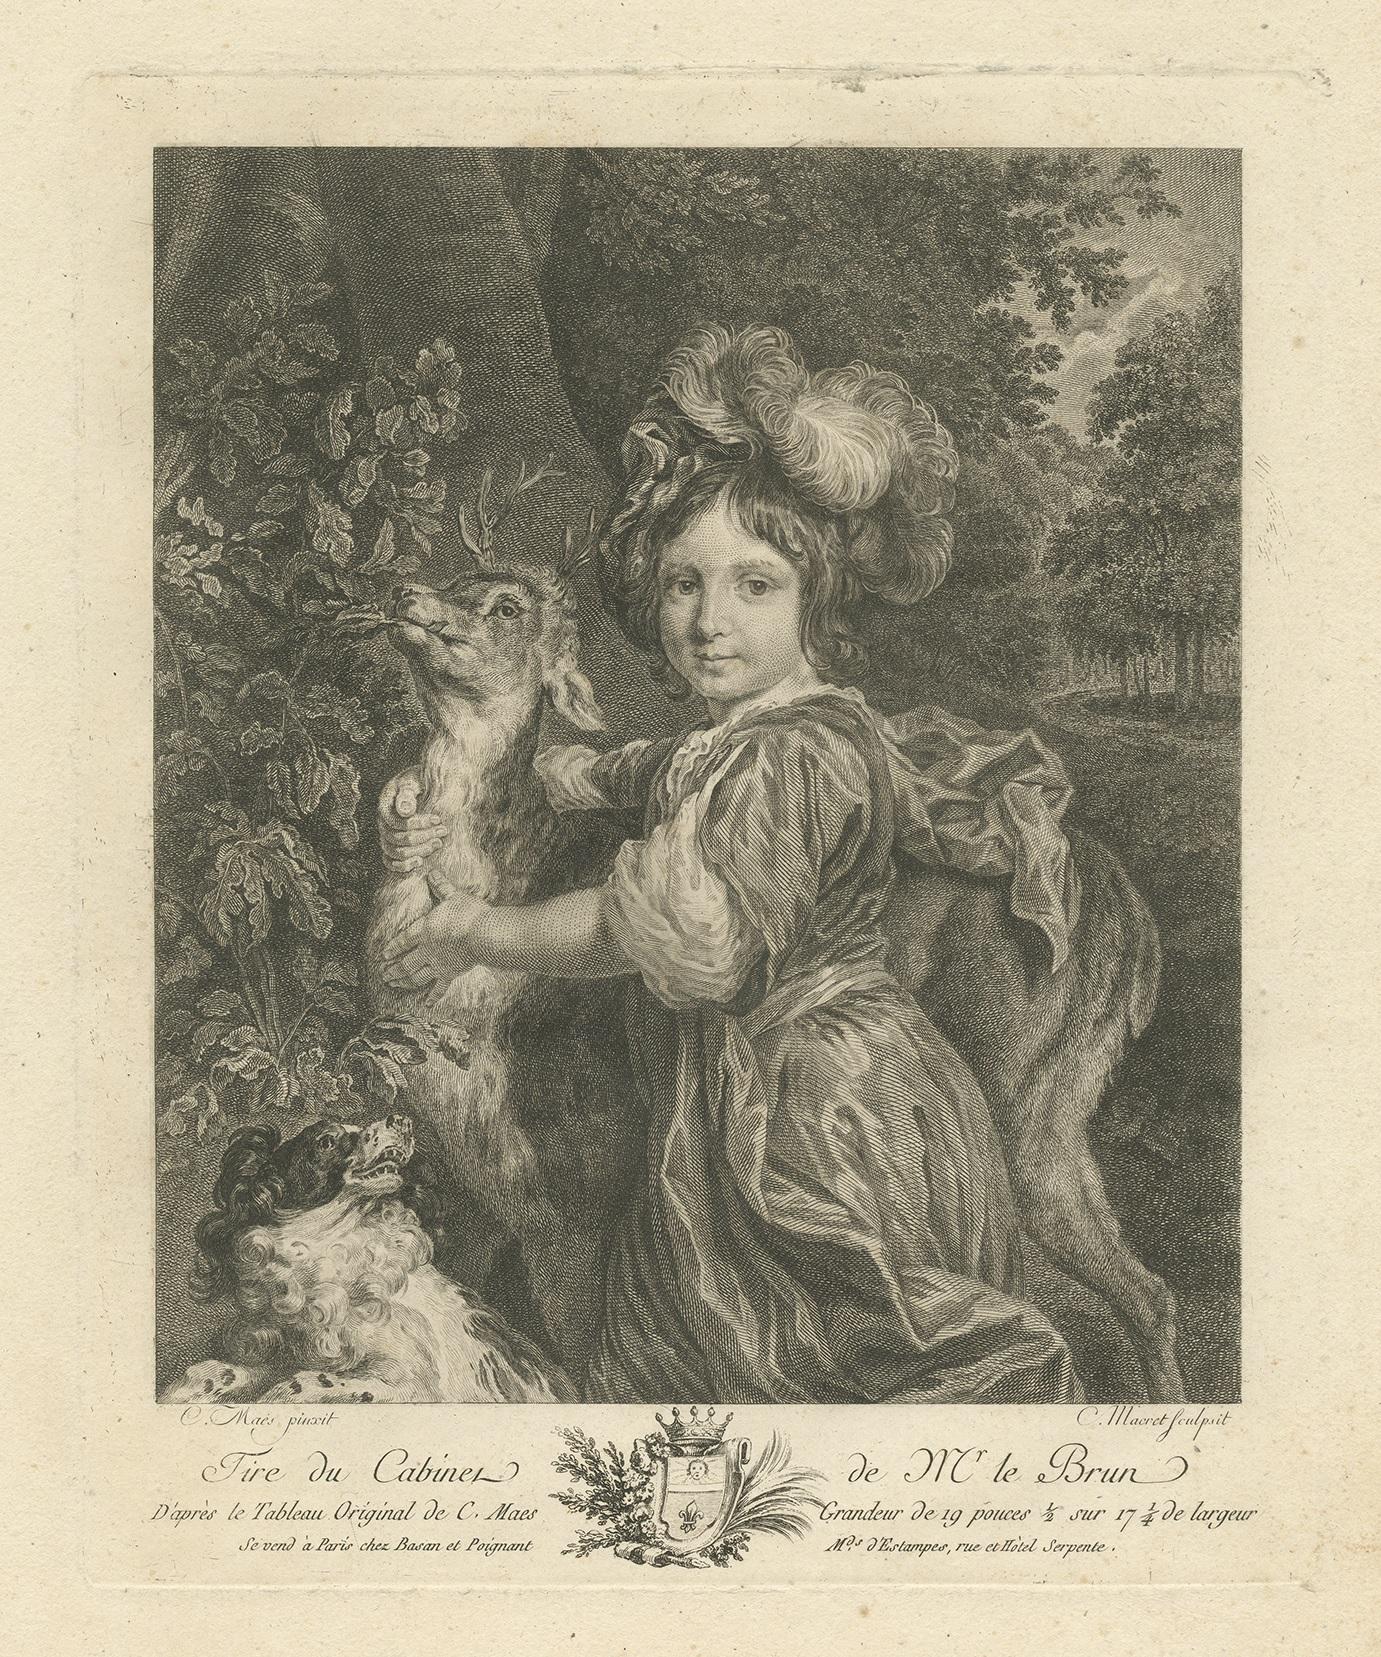 Antique print titled 'Tire du cabinet de Mr. le Brun, d'après le Tableau original de C. Maes'. Engraving after the original painting by Nicolaes Maes. Scene of a child with his arms around the neck of a deer, and a dog yapping at his feet. This